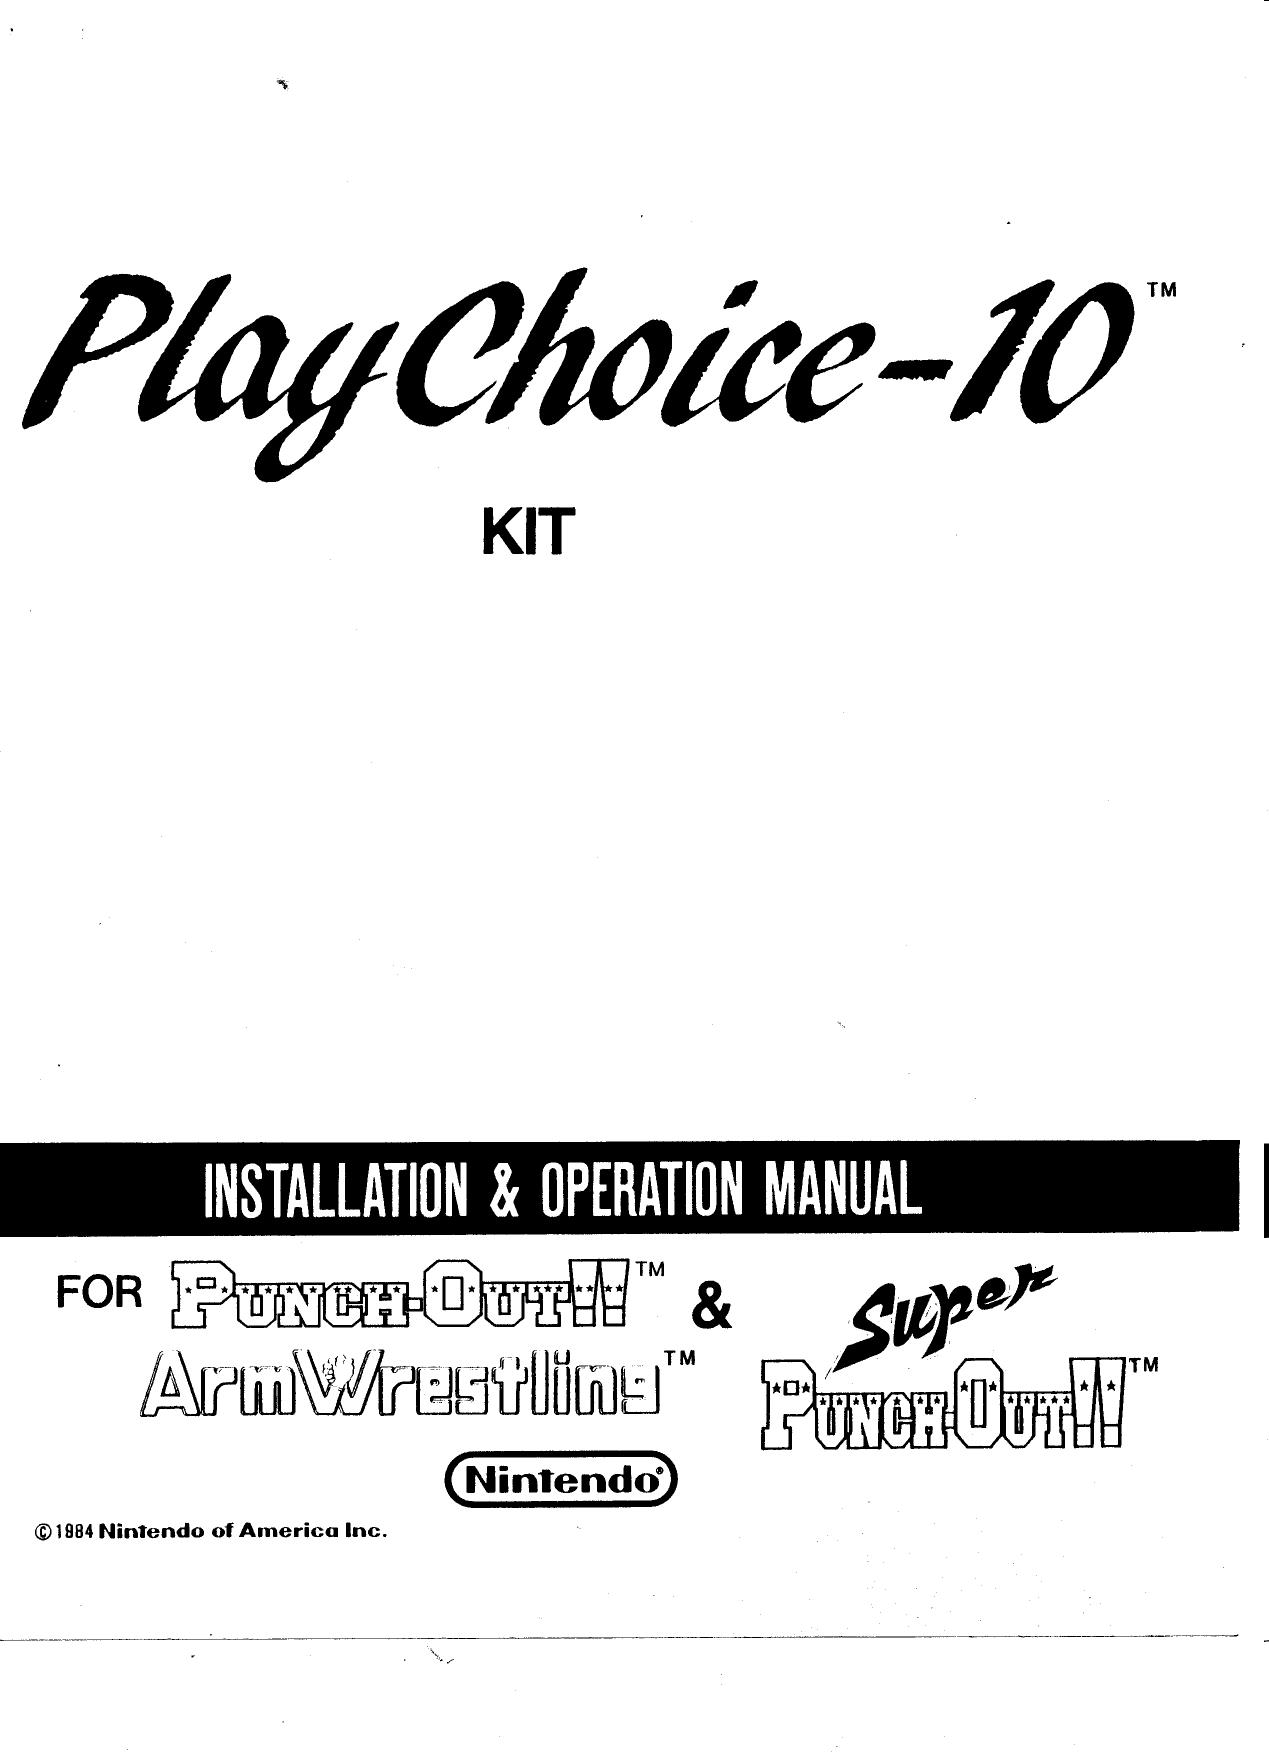 Play Choice 10 Kit (Arm Wrestling-Punch Out-Super Punch Out) (Ins & Op) (U)